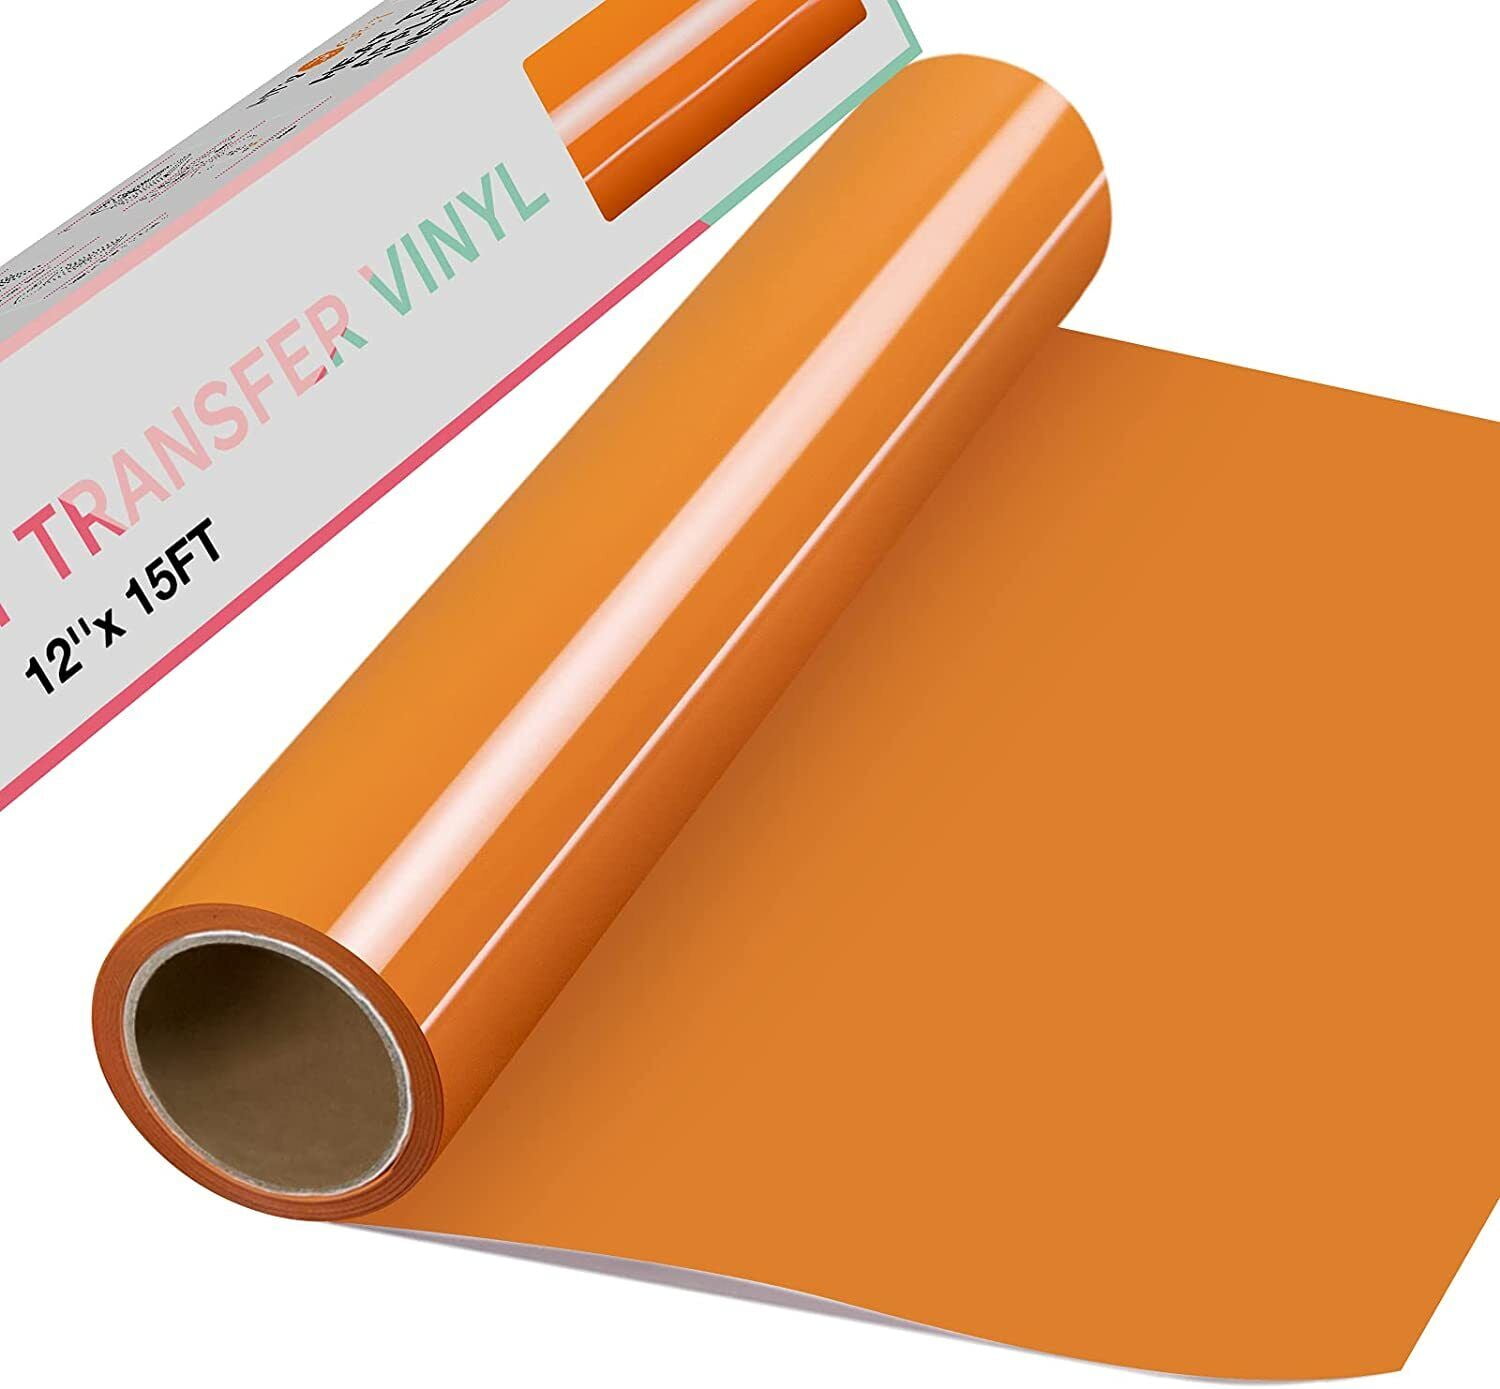 HTVRONT 12 inch x 15ft Heat Transfer Vinyl Orange HTV Roll Iron on T-Shirts, Clothing and Textiles for Cricut, Size: 12 x 15ft